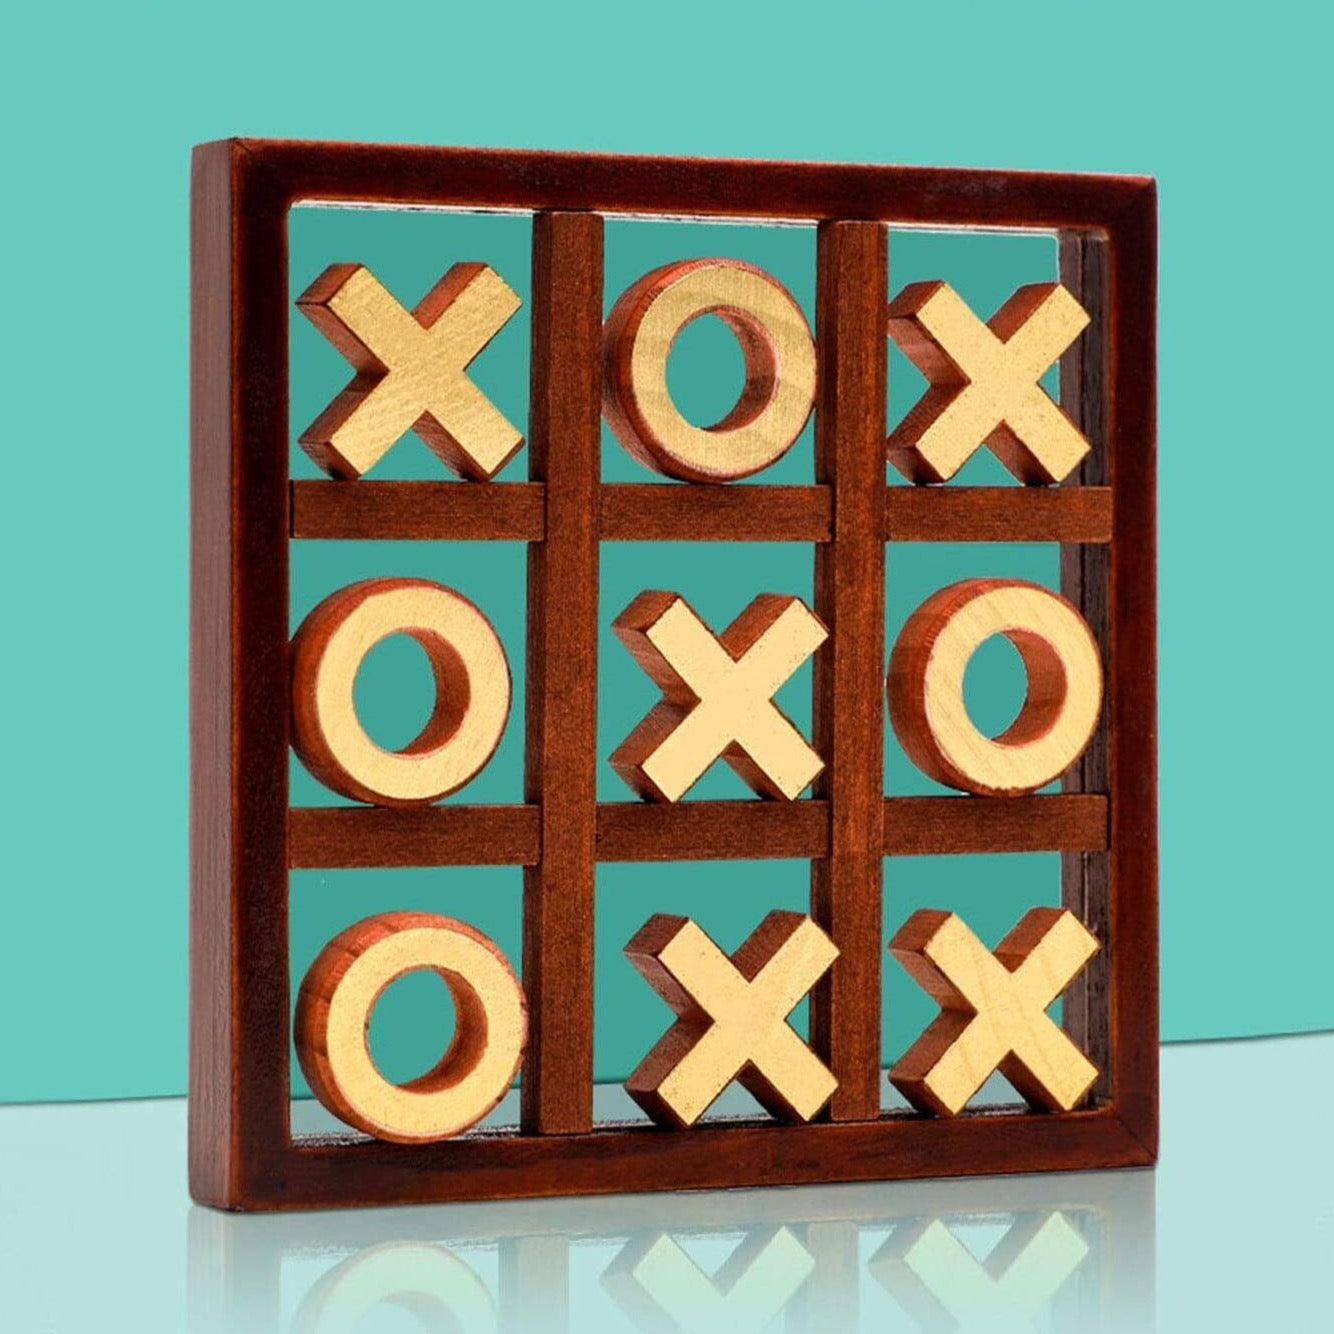 Shop 0 Brown wooden tic tac toe Wooden Tic Tac Toe Mademoiselle Home Decor